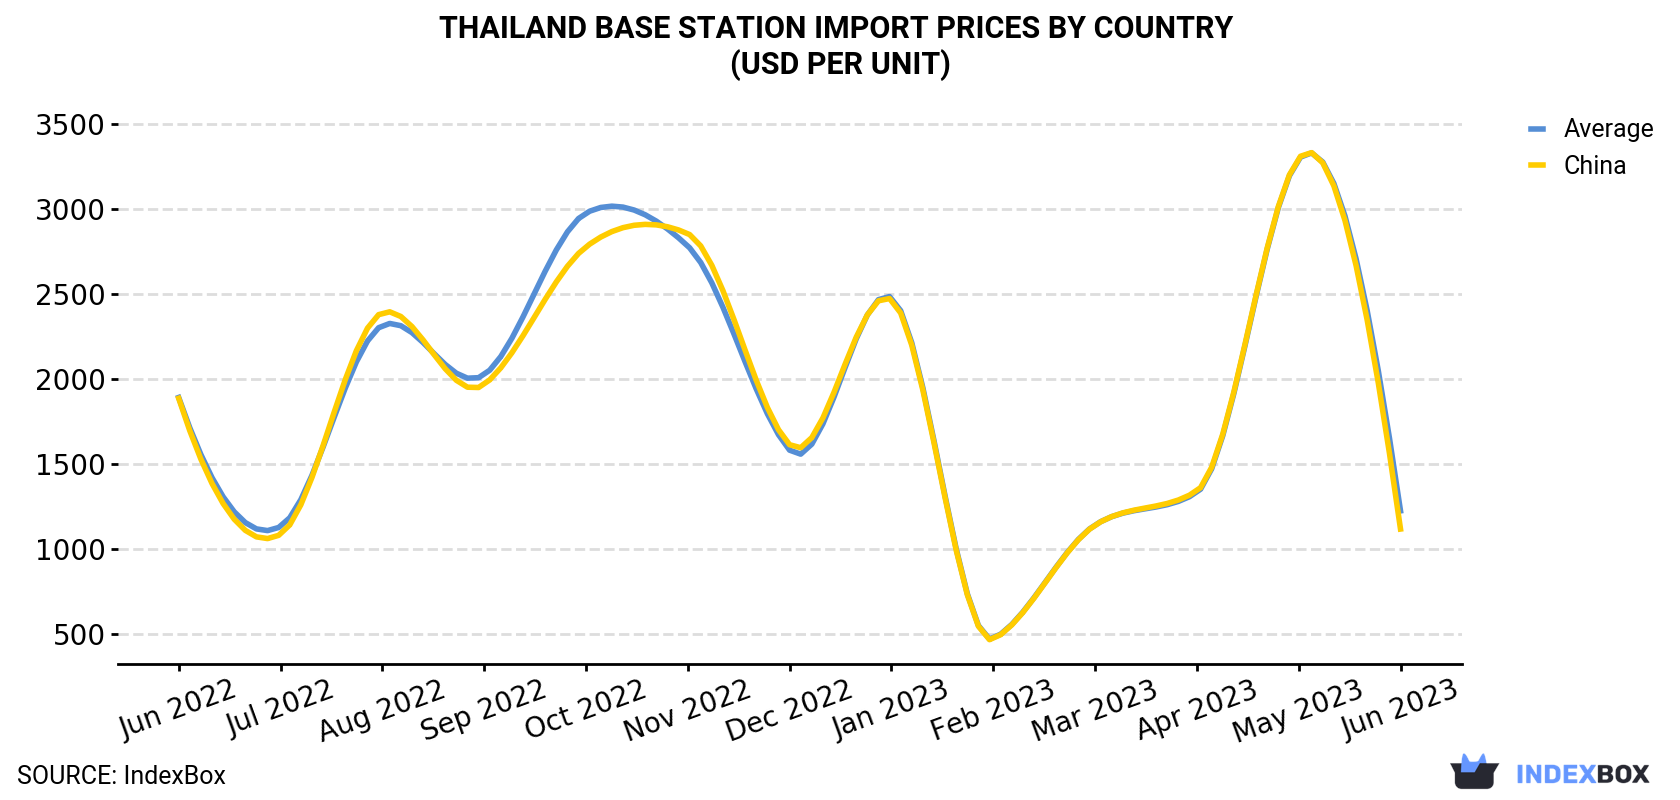 Thailand Base Station Import Prices By Country (USD Per Unit)